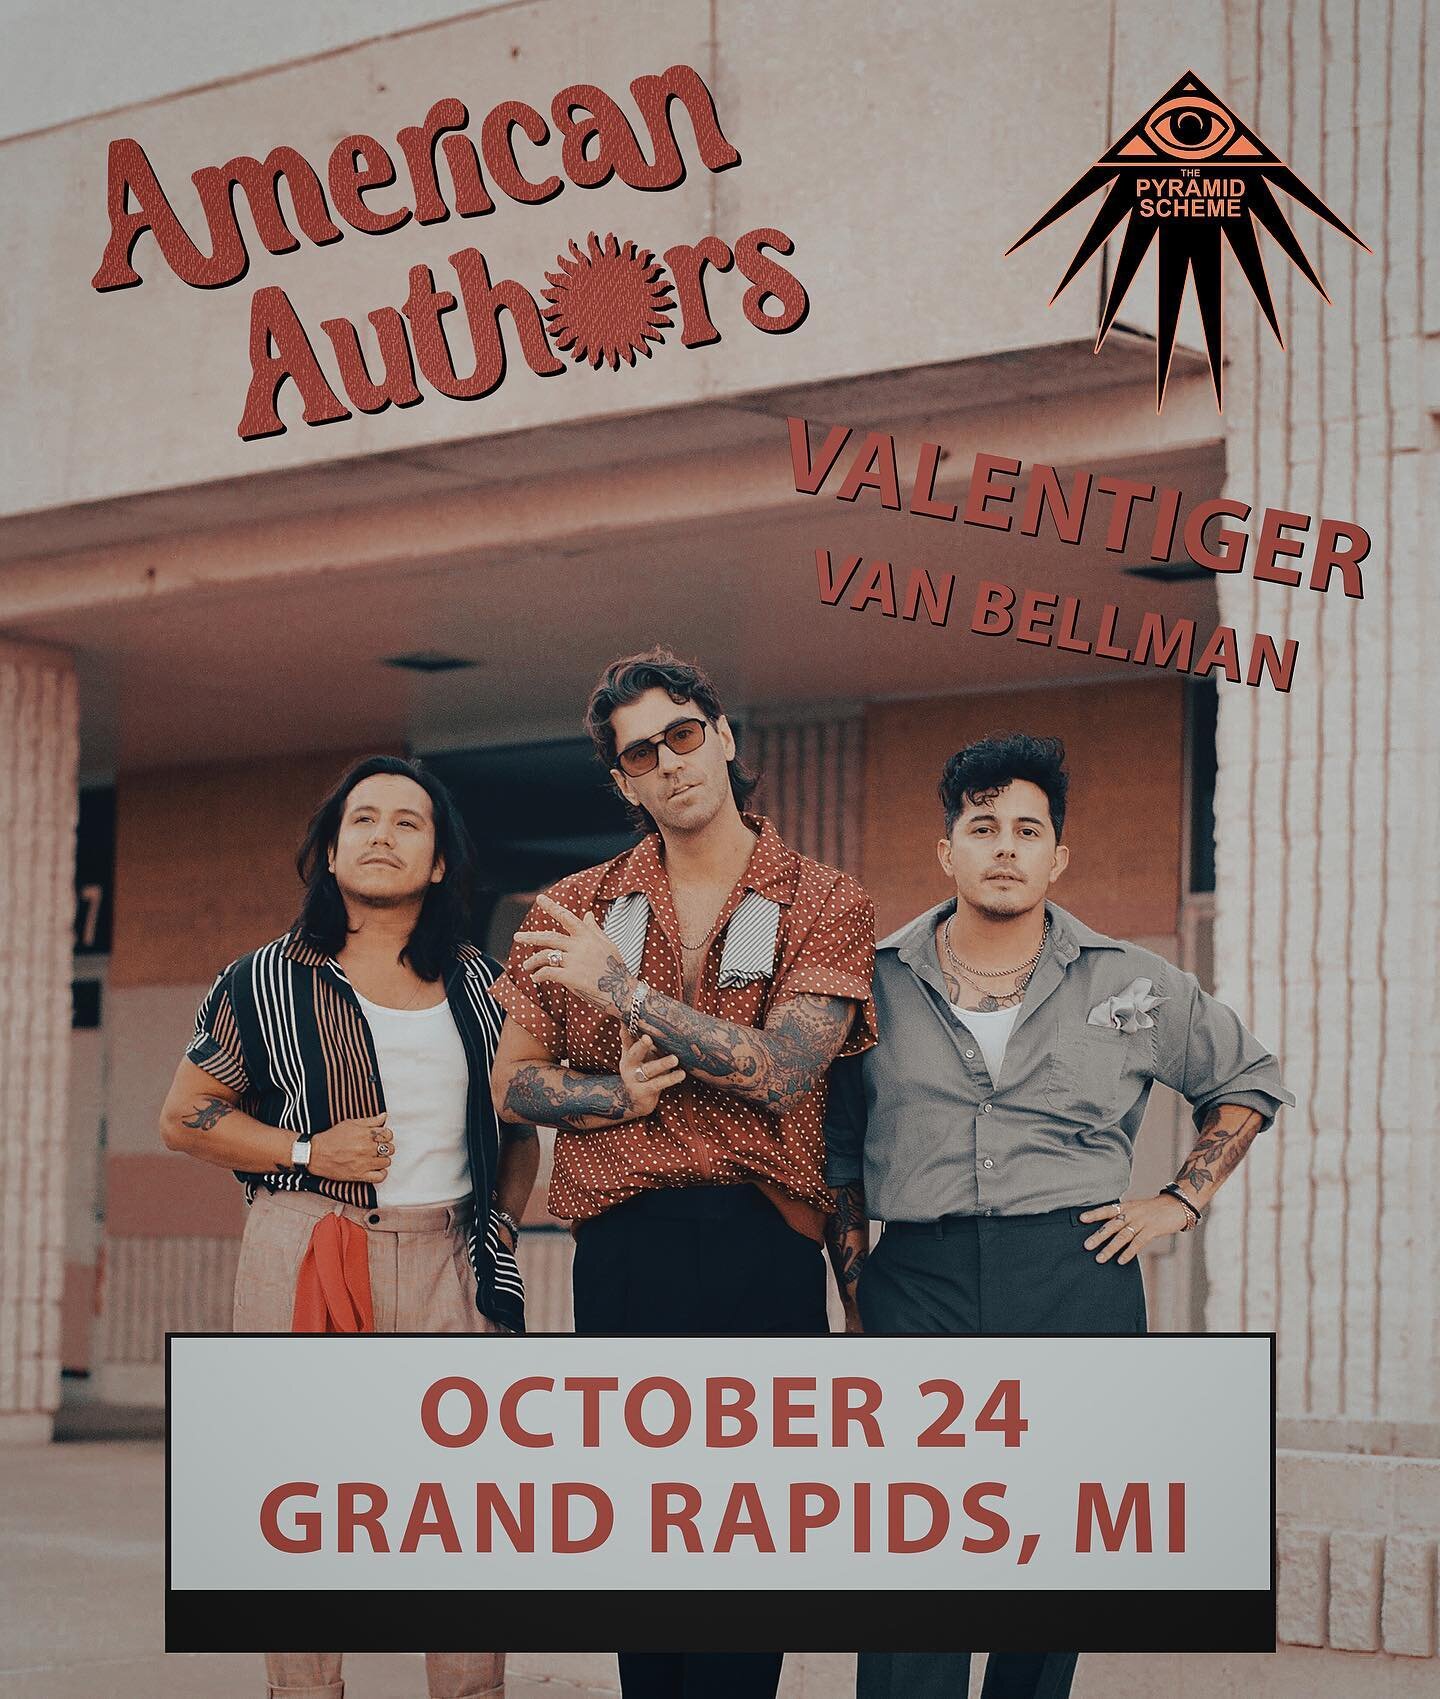 We&rsquo;ll be opening for @americanauthors on 10/24 at @pyramidschemegr. Head over to our website for a chance to win some free tickets, or DM us for other arrangements.
.
.
.
#valentiger #americanauthors #bestdayofmylife #pyramidscheme #grandrapids